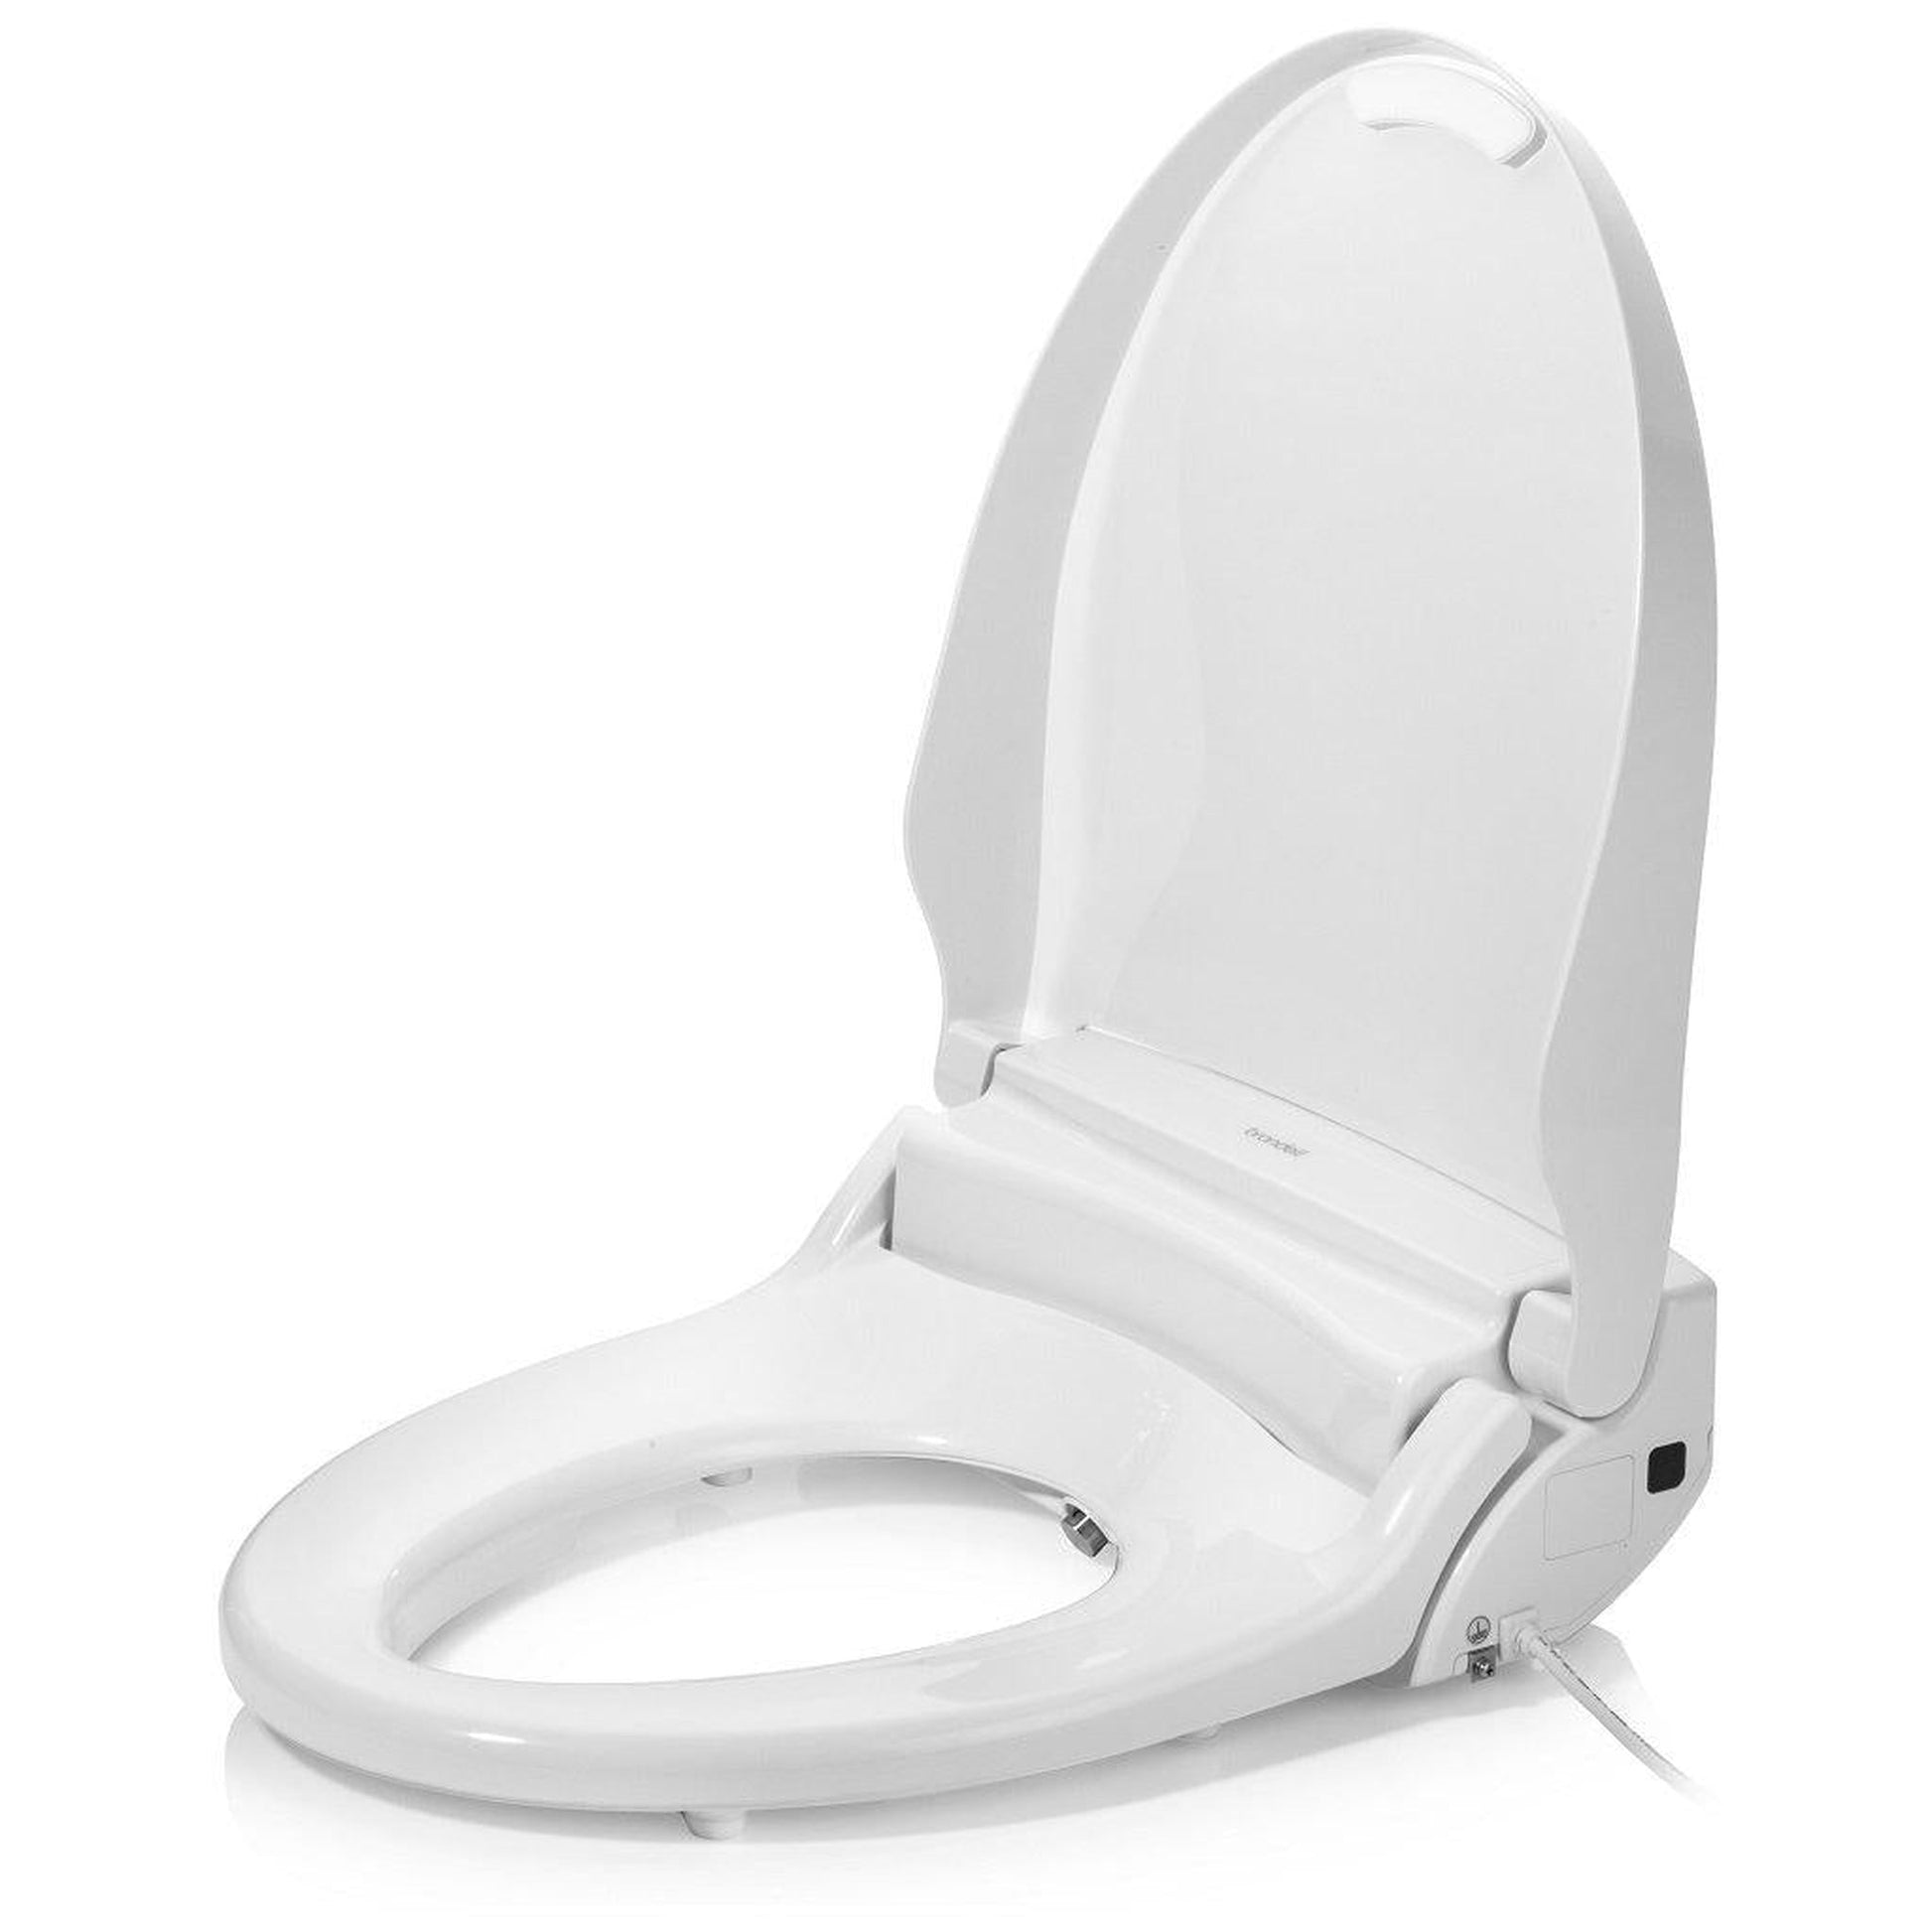 Brondell Swash Select DR802 20.7" White Elongated Electric Luxury Bidet Toilet Seat With Wireless Remote Control